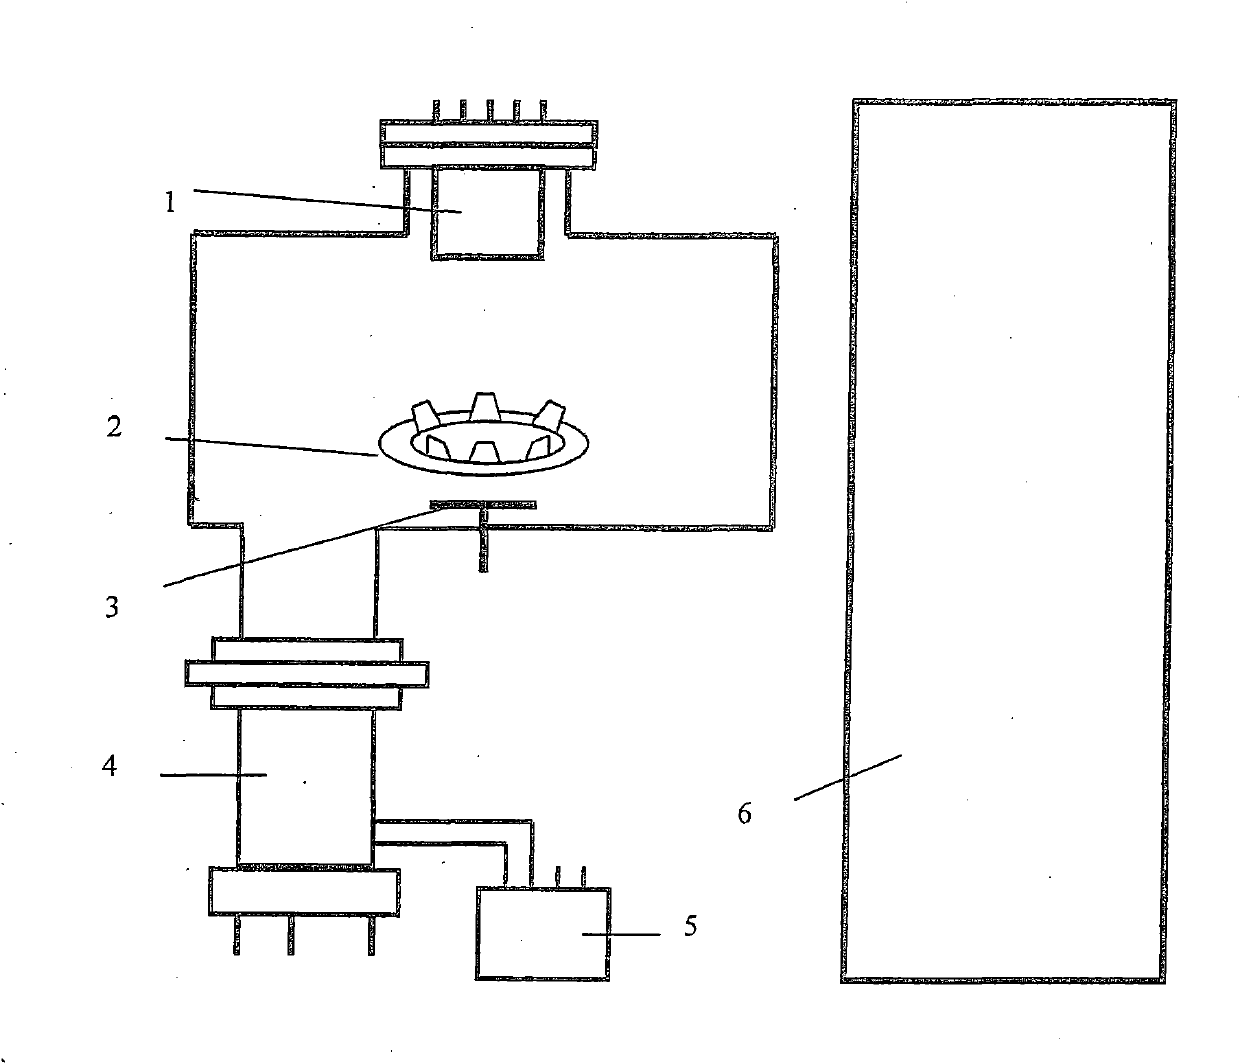 Ion beam surface treatment equipment and method for suppressing secondary electron emission